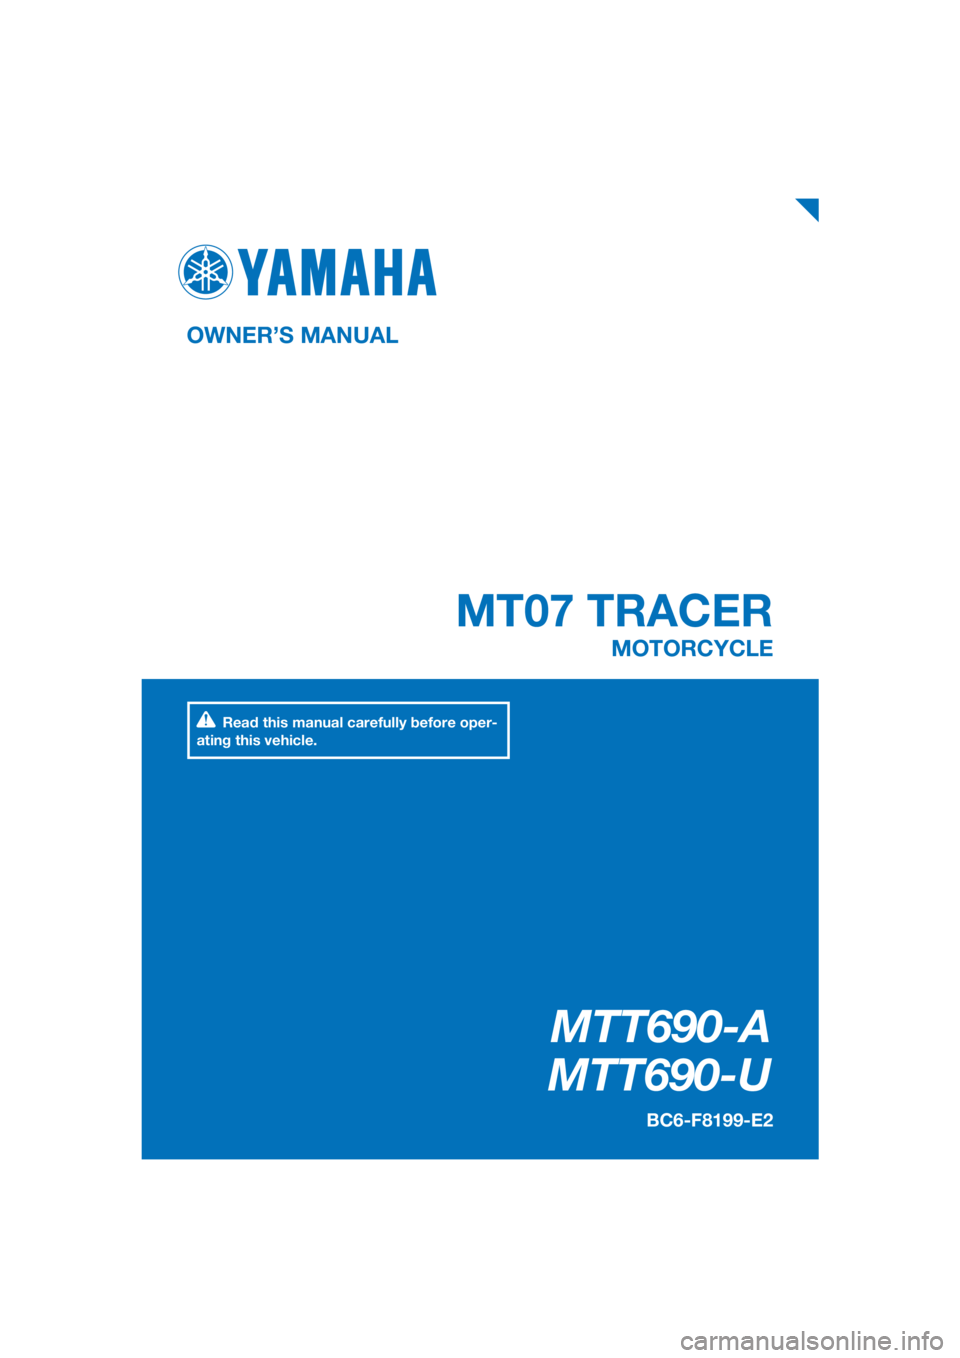 YAMAHA TRACER 700 2017  Owners Manual PANTONE285C
MTT690-A
MTT690-U
MT07 TRACER
OWNER’S MANUAL
BC6-F8199-E2
MOTORCYCLE
[English  (E)]
Read this manual carefully before oper-
ating this vehicle. 